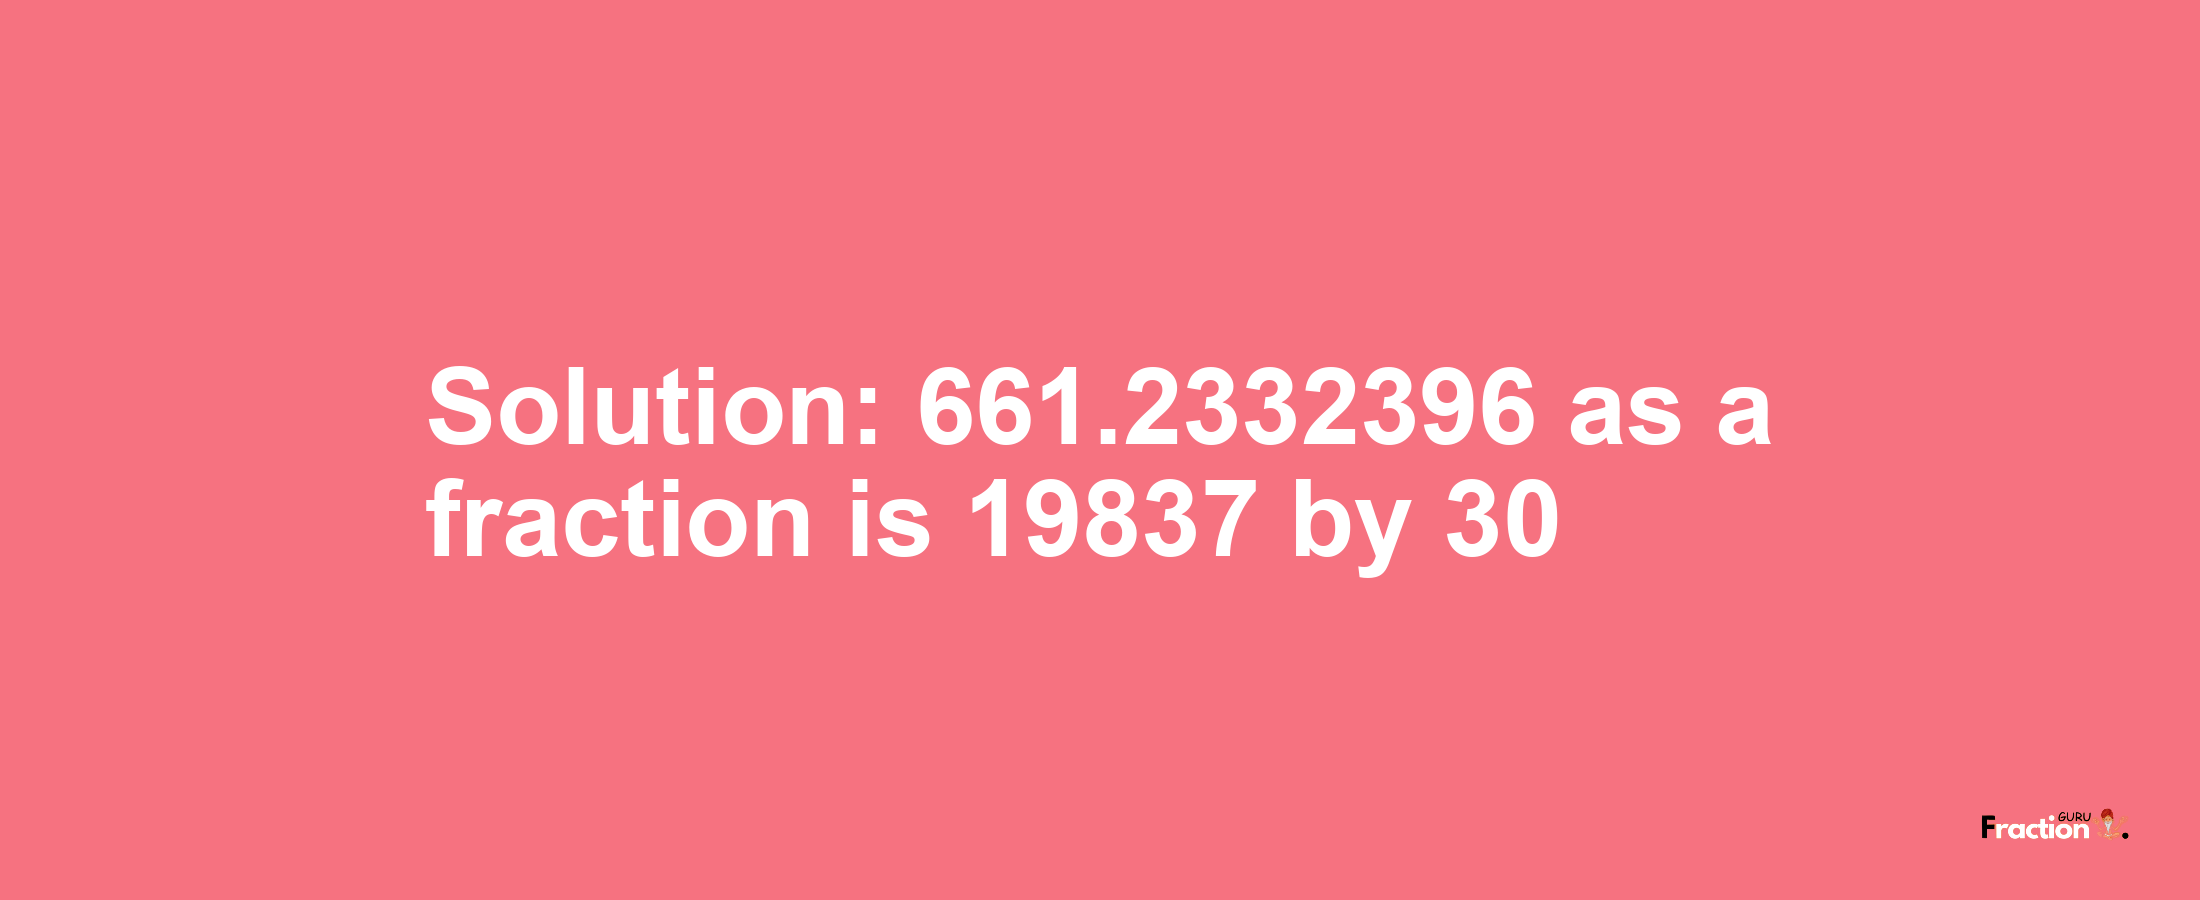 Solution:661.2332396 as a fraction is 19837/30